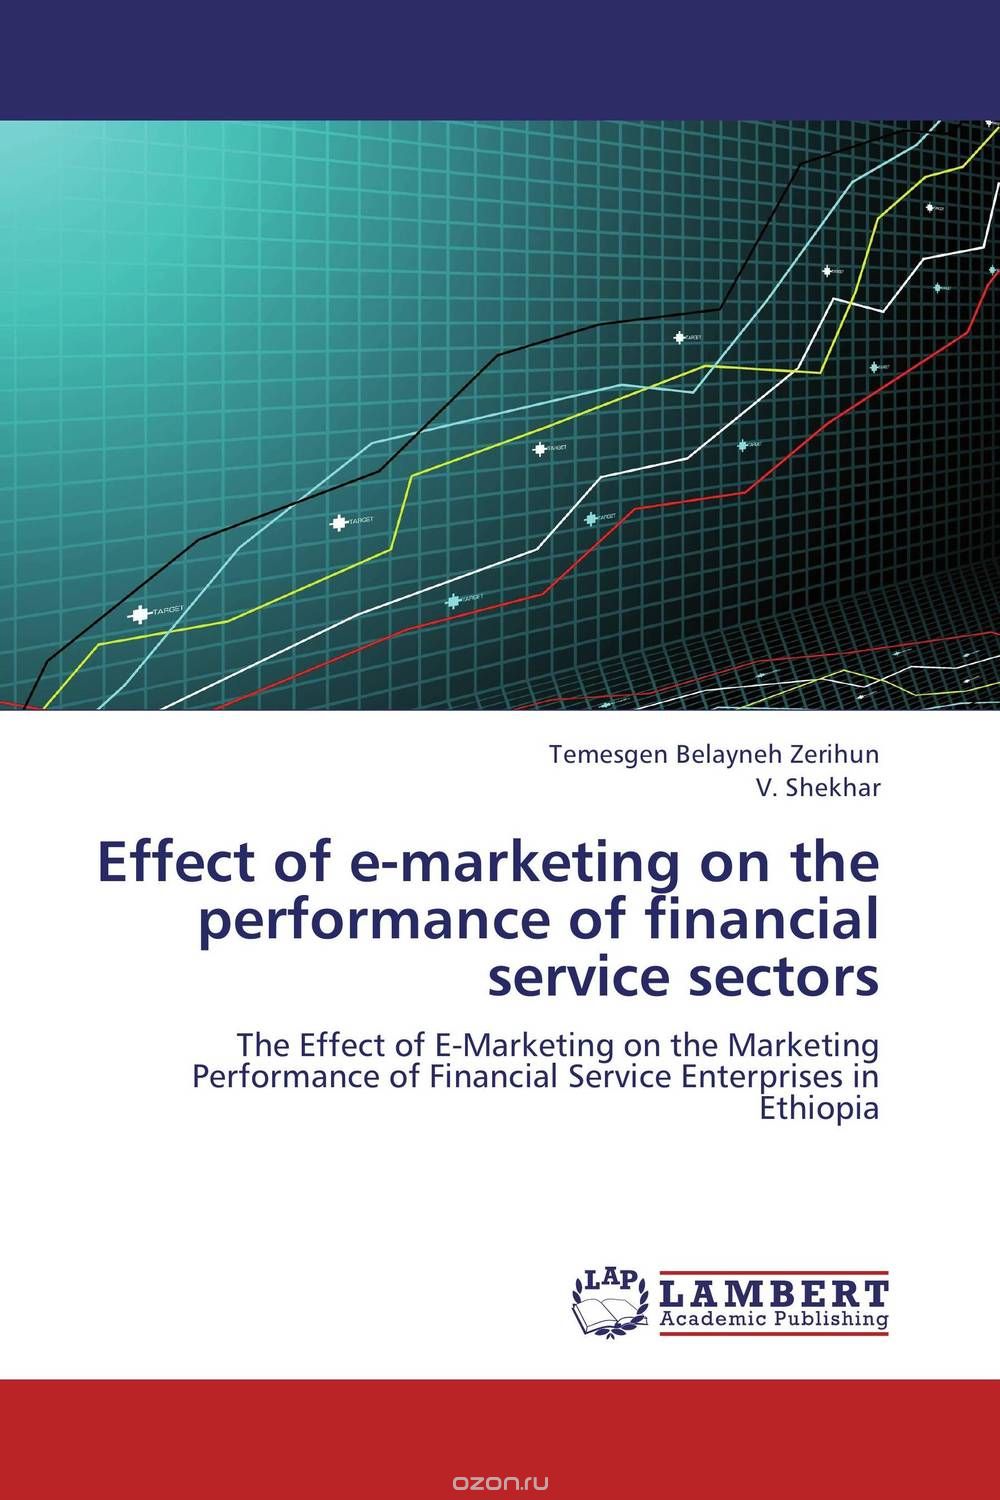 Effect of e-marketing on the performance of financial service sectors